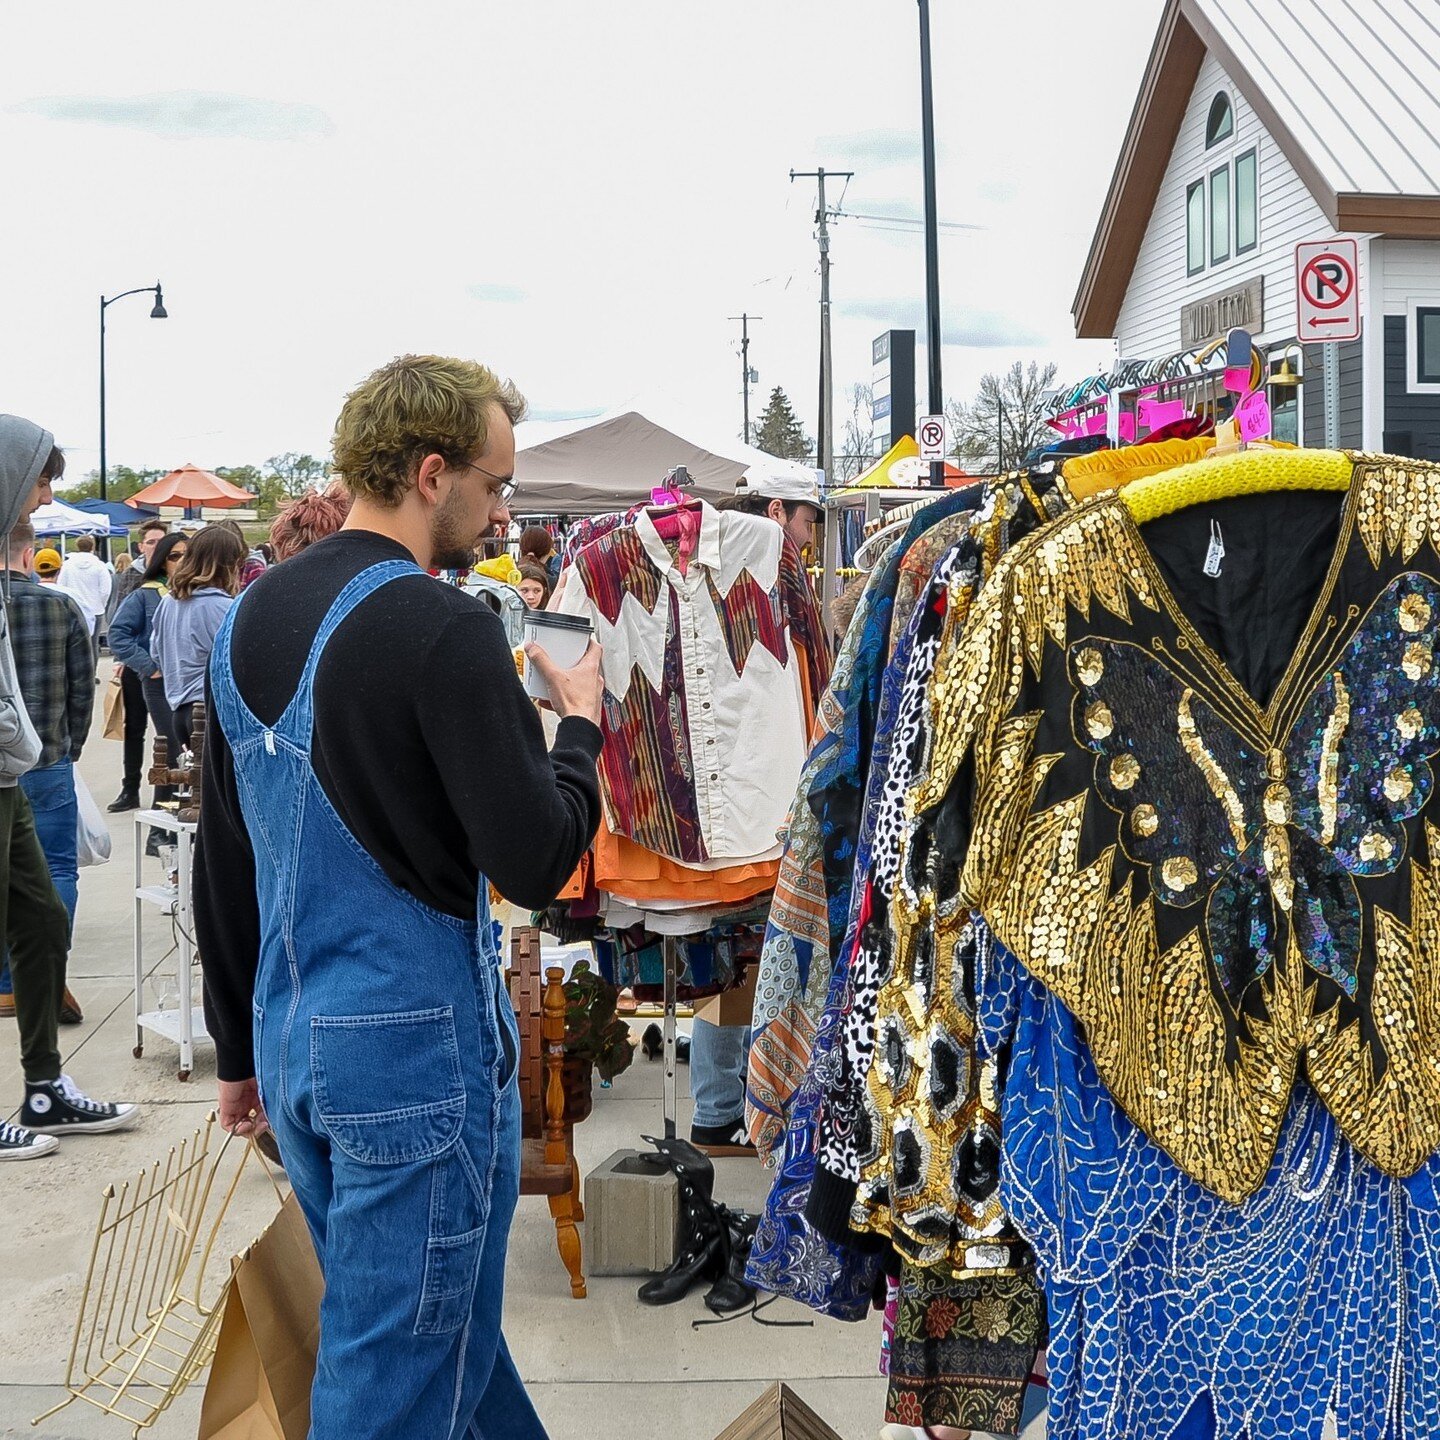 One of the coolest events in town is back for another season! The (rescheduled) Spring Vintage Market at @wildterracider is THIS WEEKEND! Peruse the coolest collection of vintage vendors with a cider in hand from 12 PM to 4 PM.